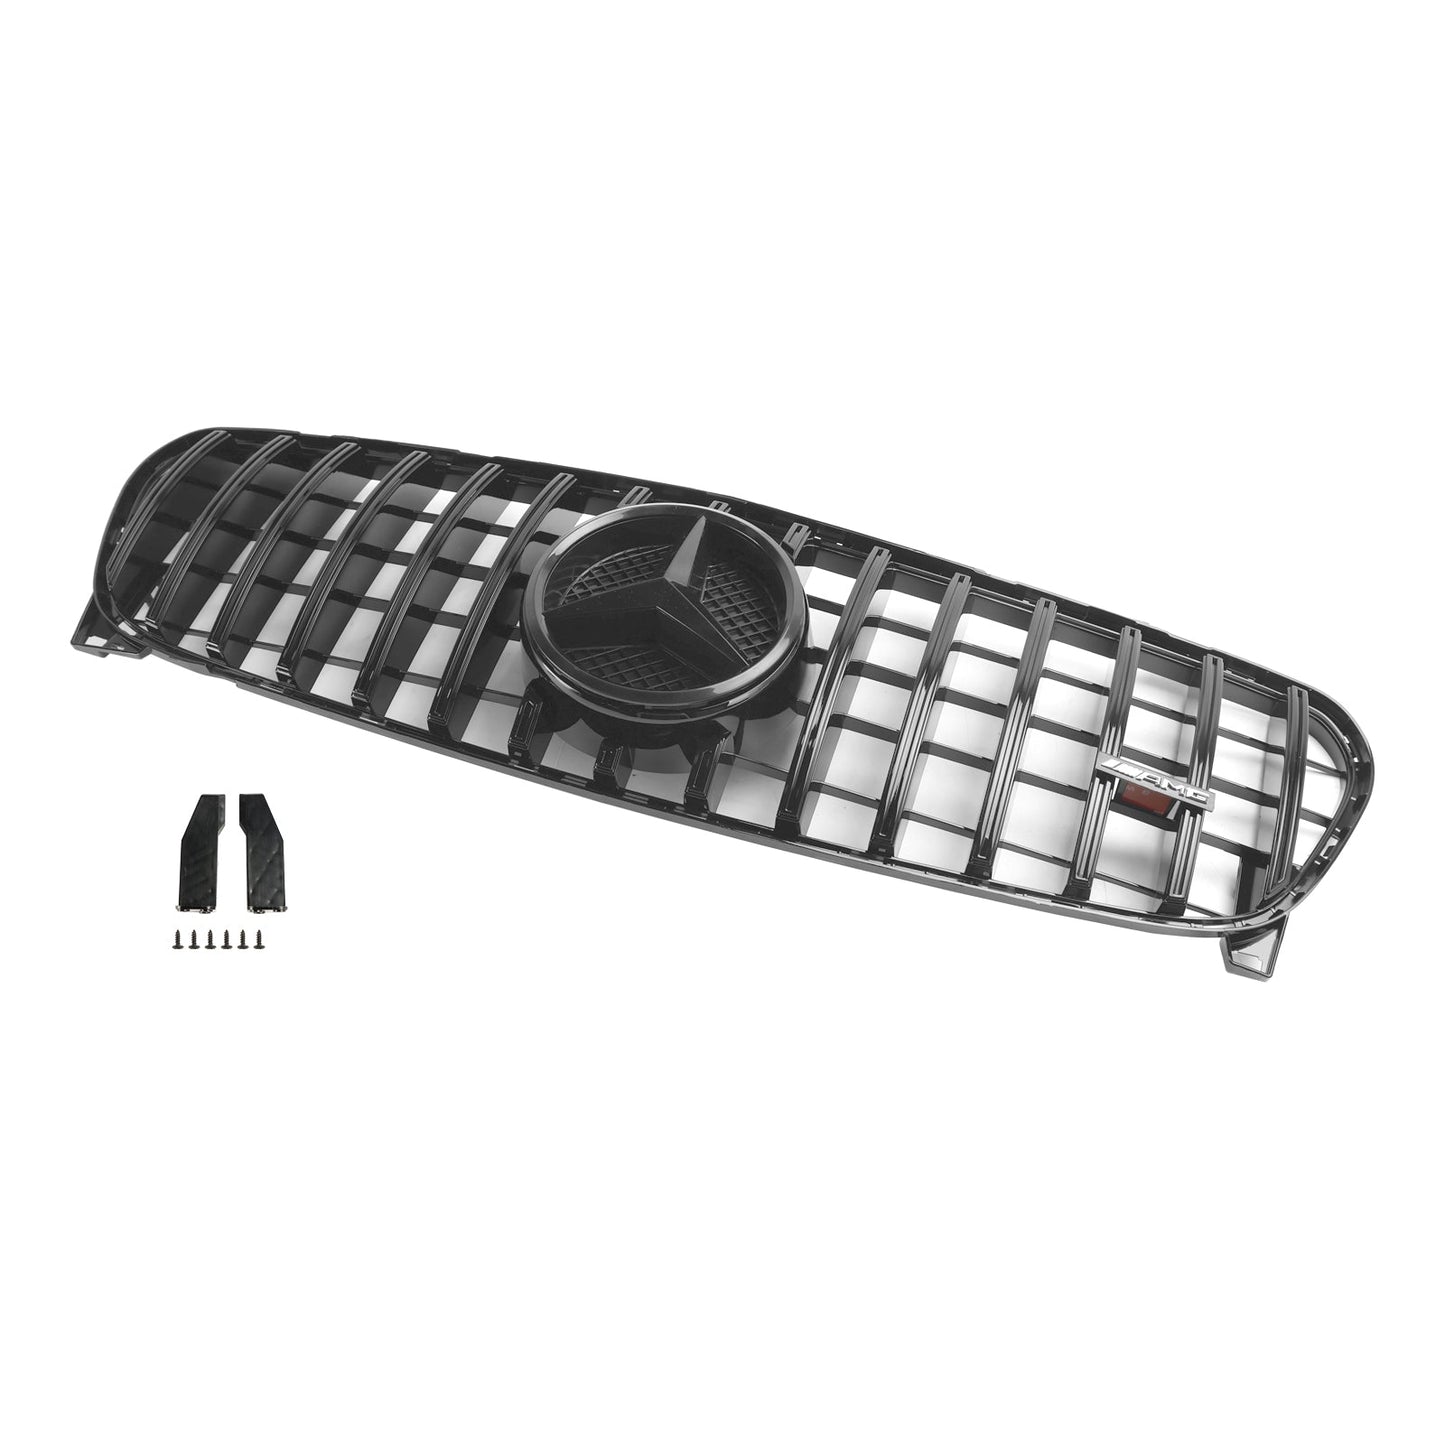 2017-2019 Mercedes Benz GLA W156 X156 Front Grill Grille Facelift Black